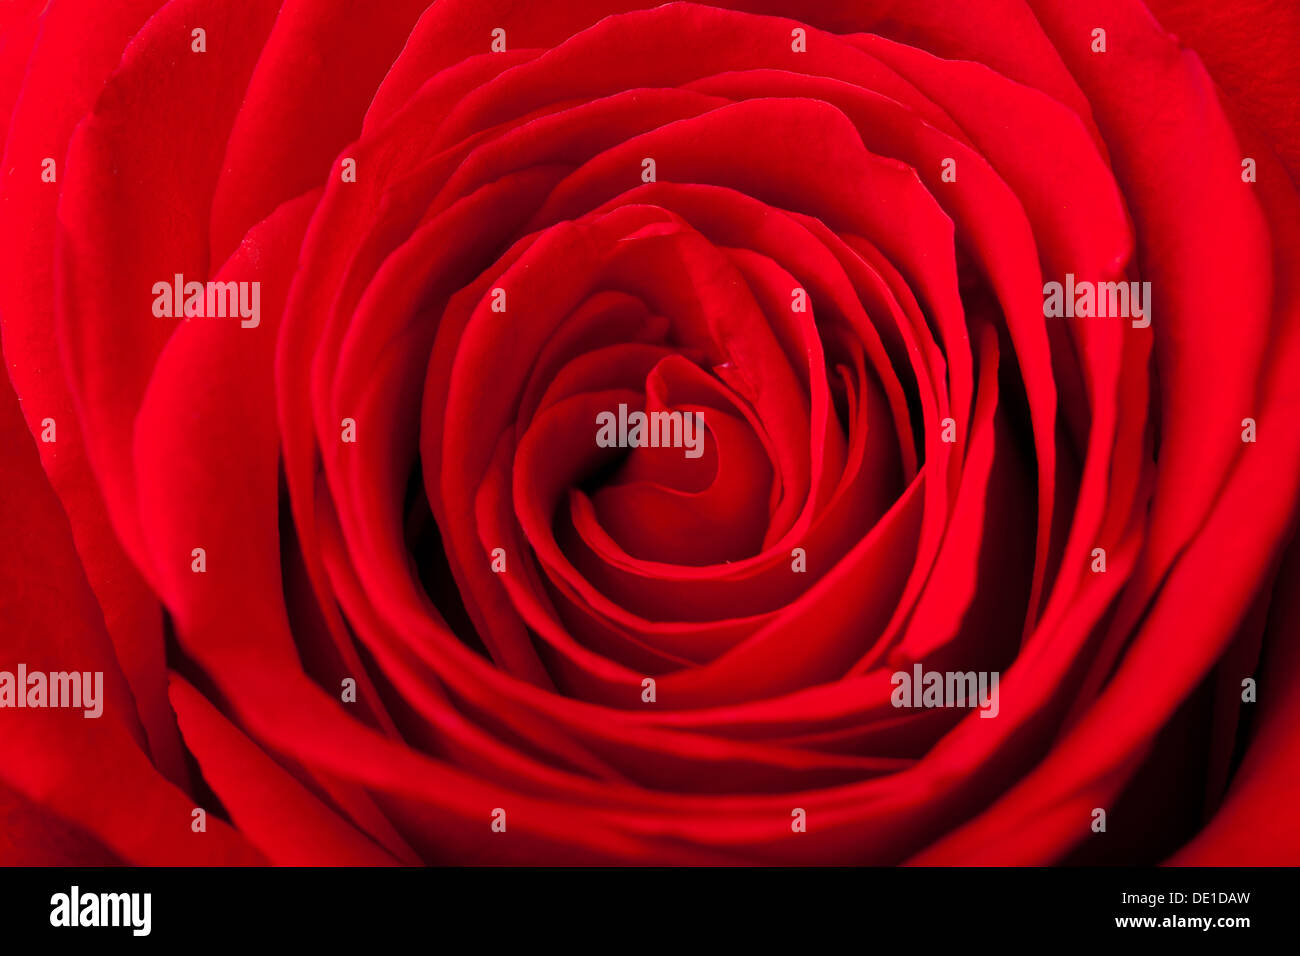 beautiful red rose background Stock Photo